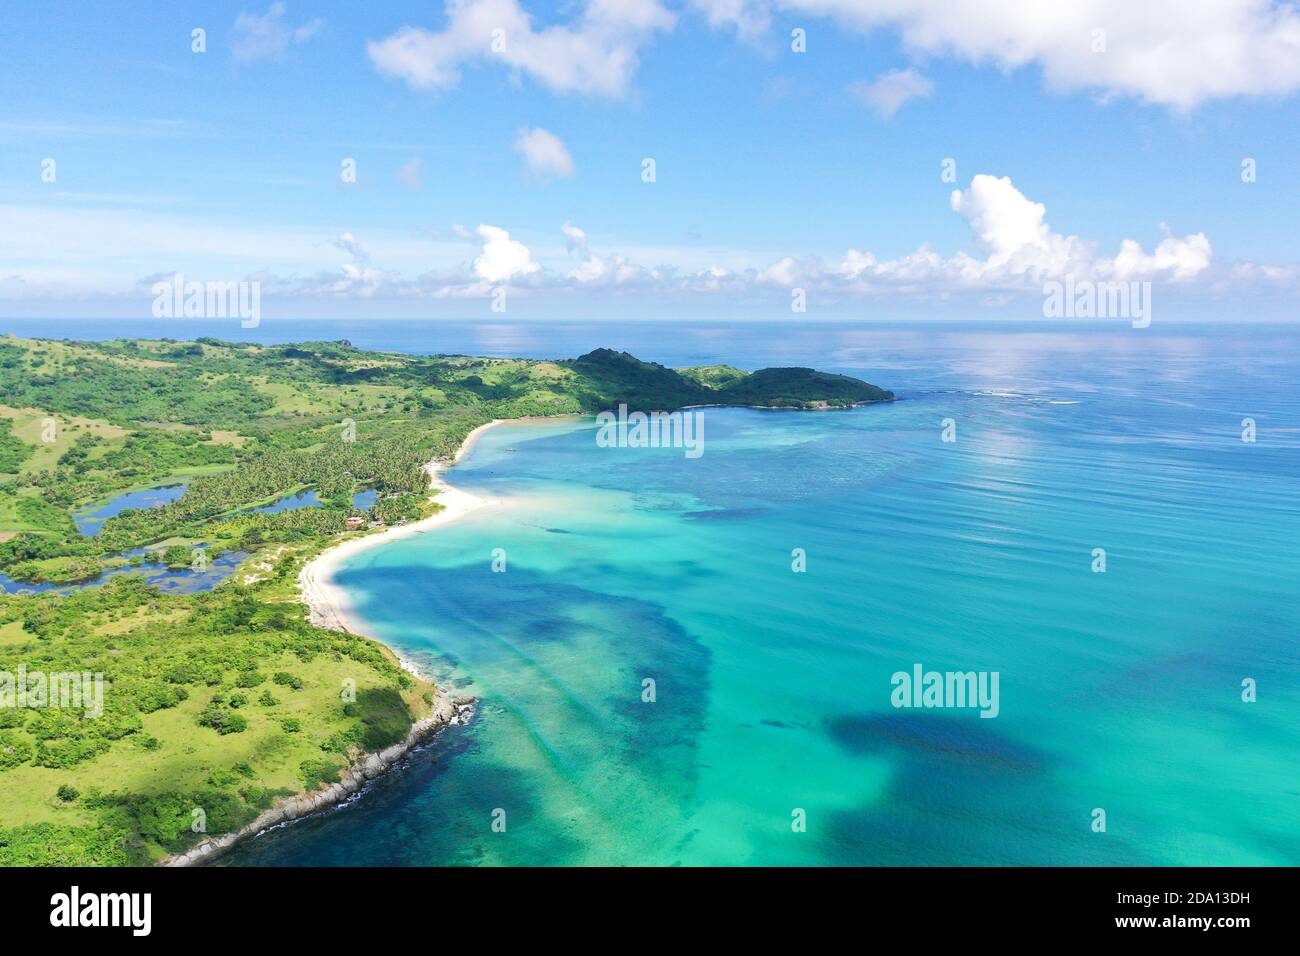 A tropical island with a turquoise lagoon and a sandbank. Caramoan Islands, Philippines. Beautiful islands, view from above. Summer and travel vacation concept. Stock Photo